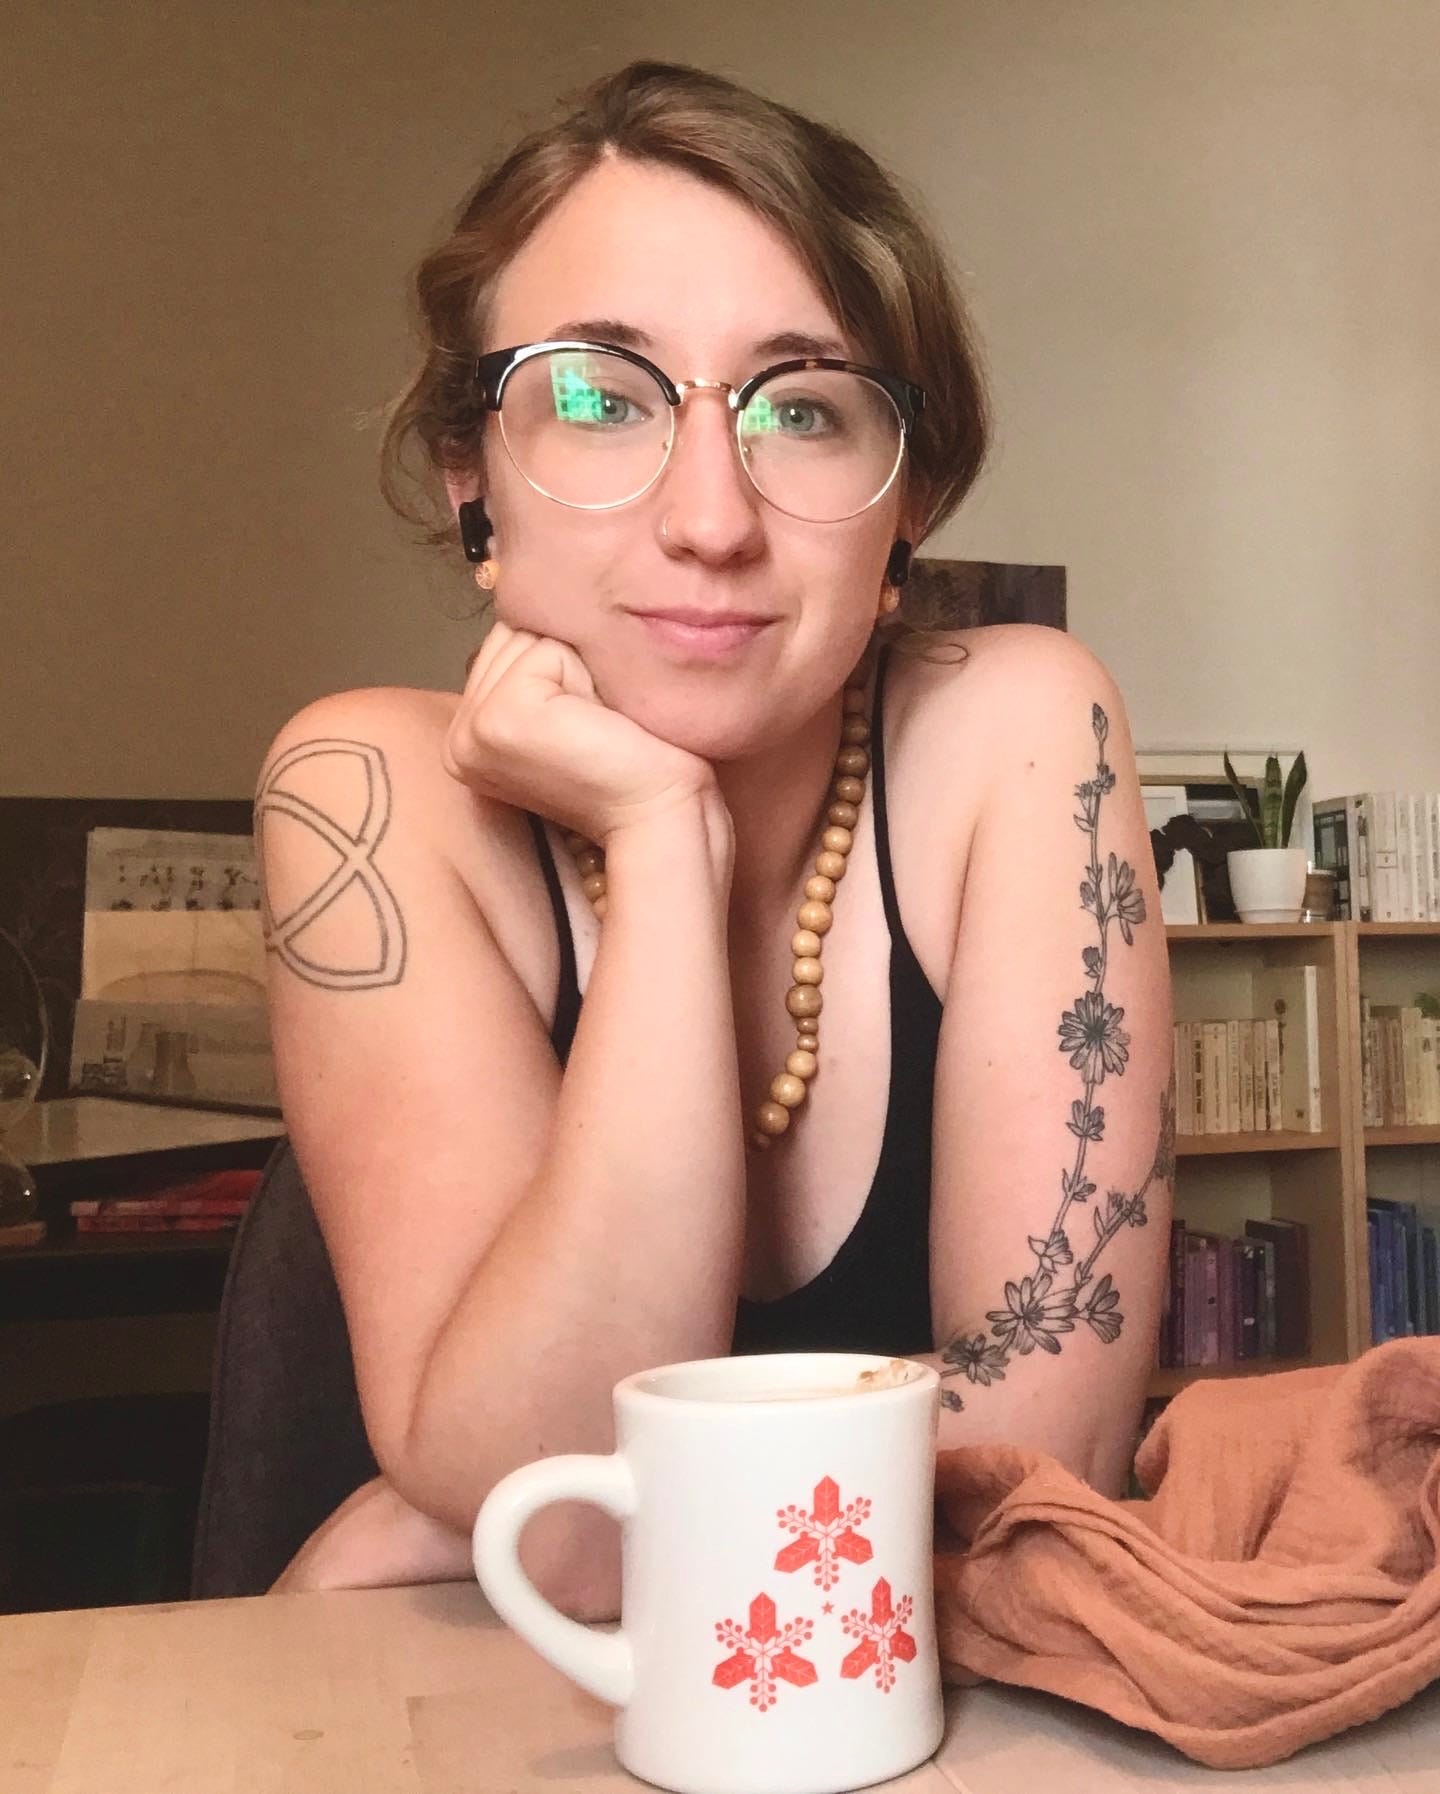 a white woman with brown hair and glasses is resting her chin on her hand. she is slightly smiling at the camera. she has several tattoos on her arms. 